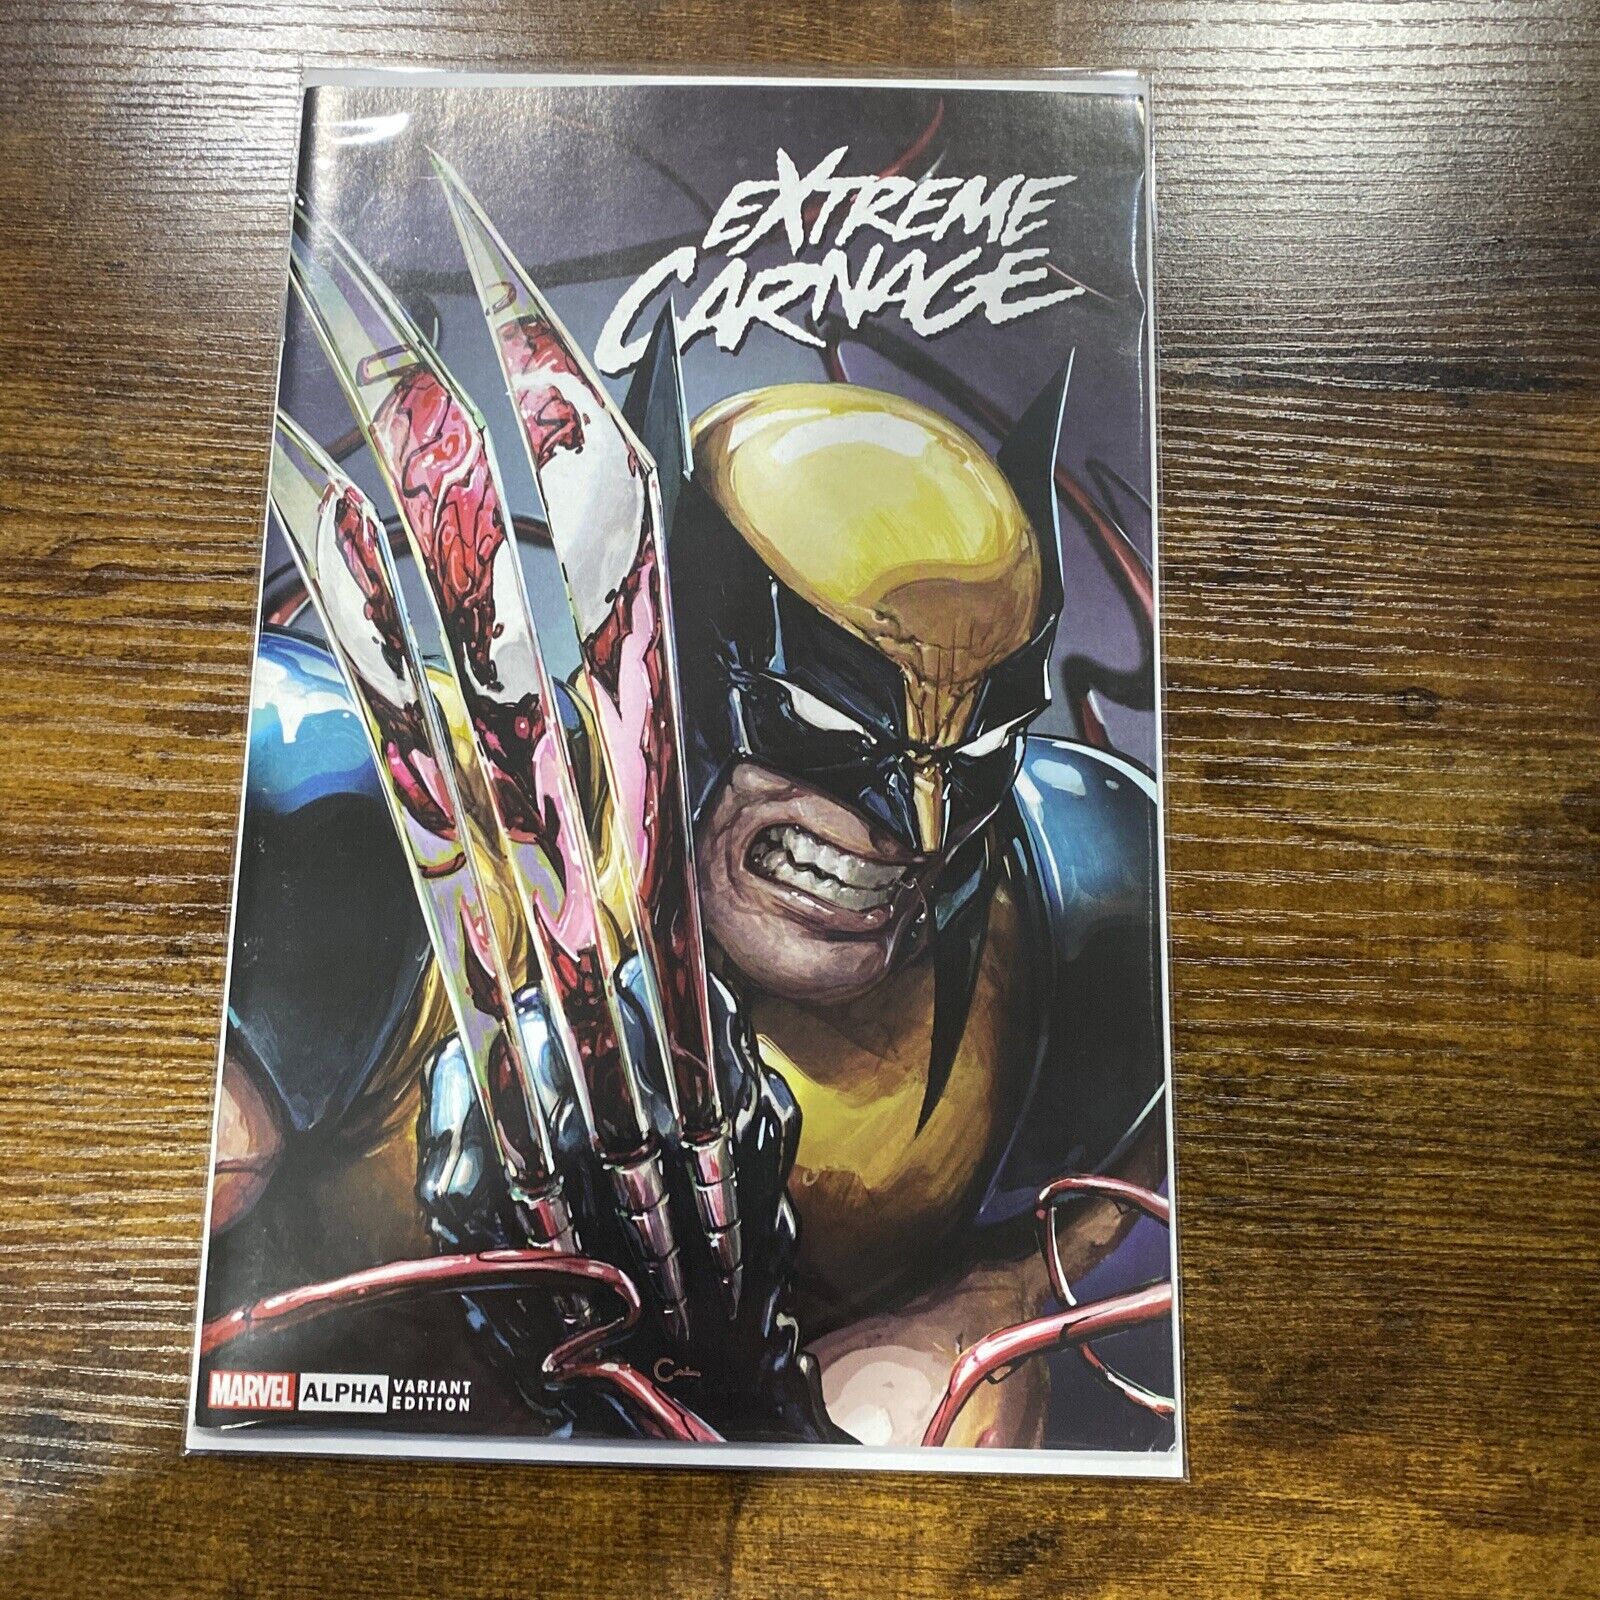 EXTREME CARNAGE ALPHA #1 * NM or Better * CLAYTON CRAIN WOLVERINE TRADE VARIANT